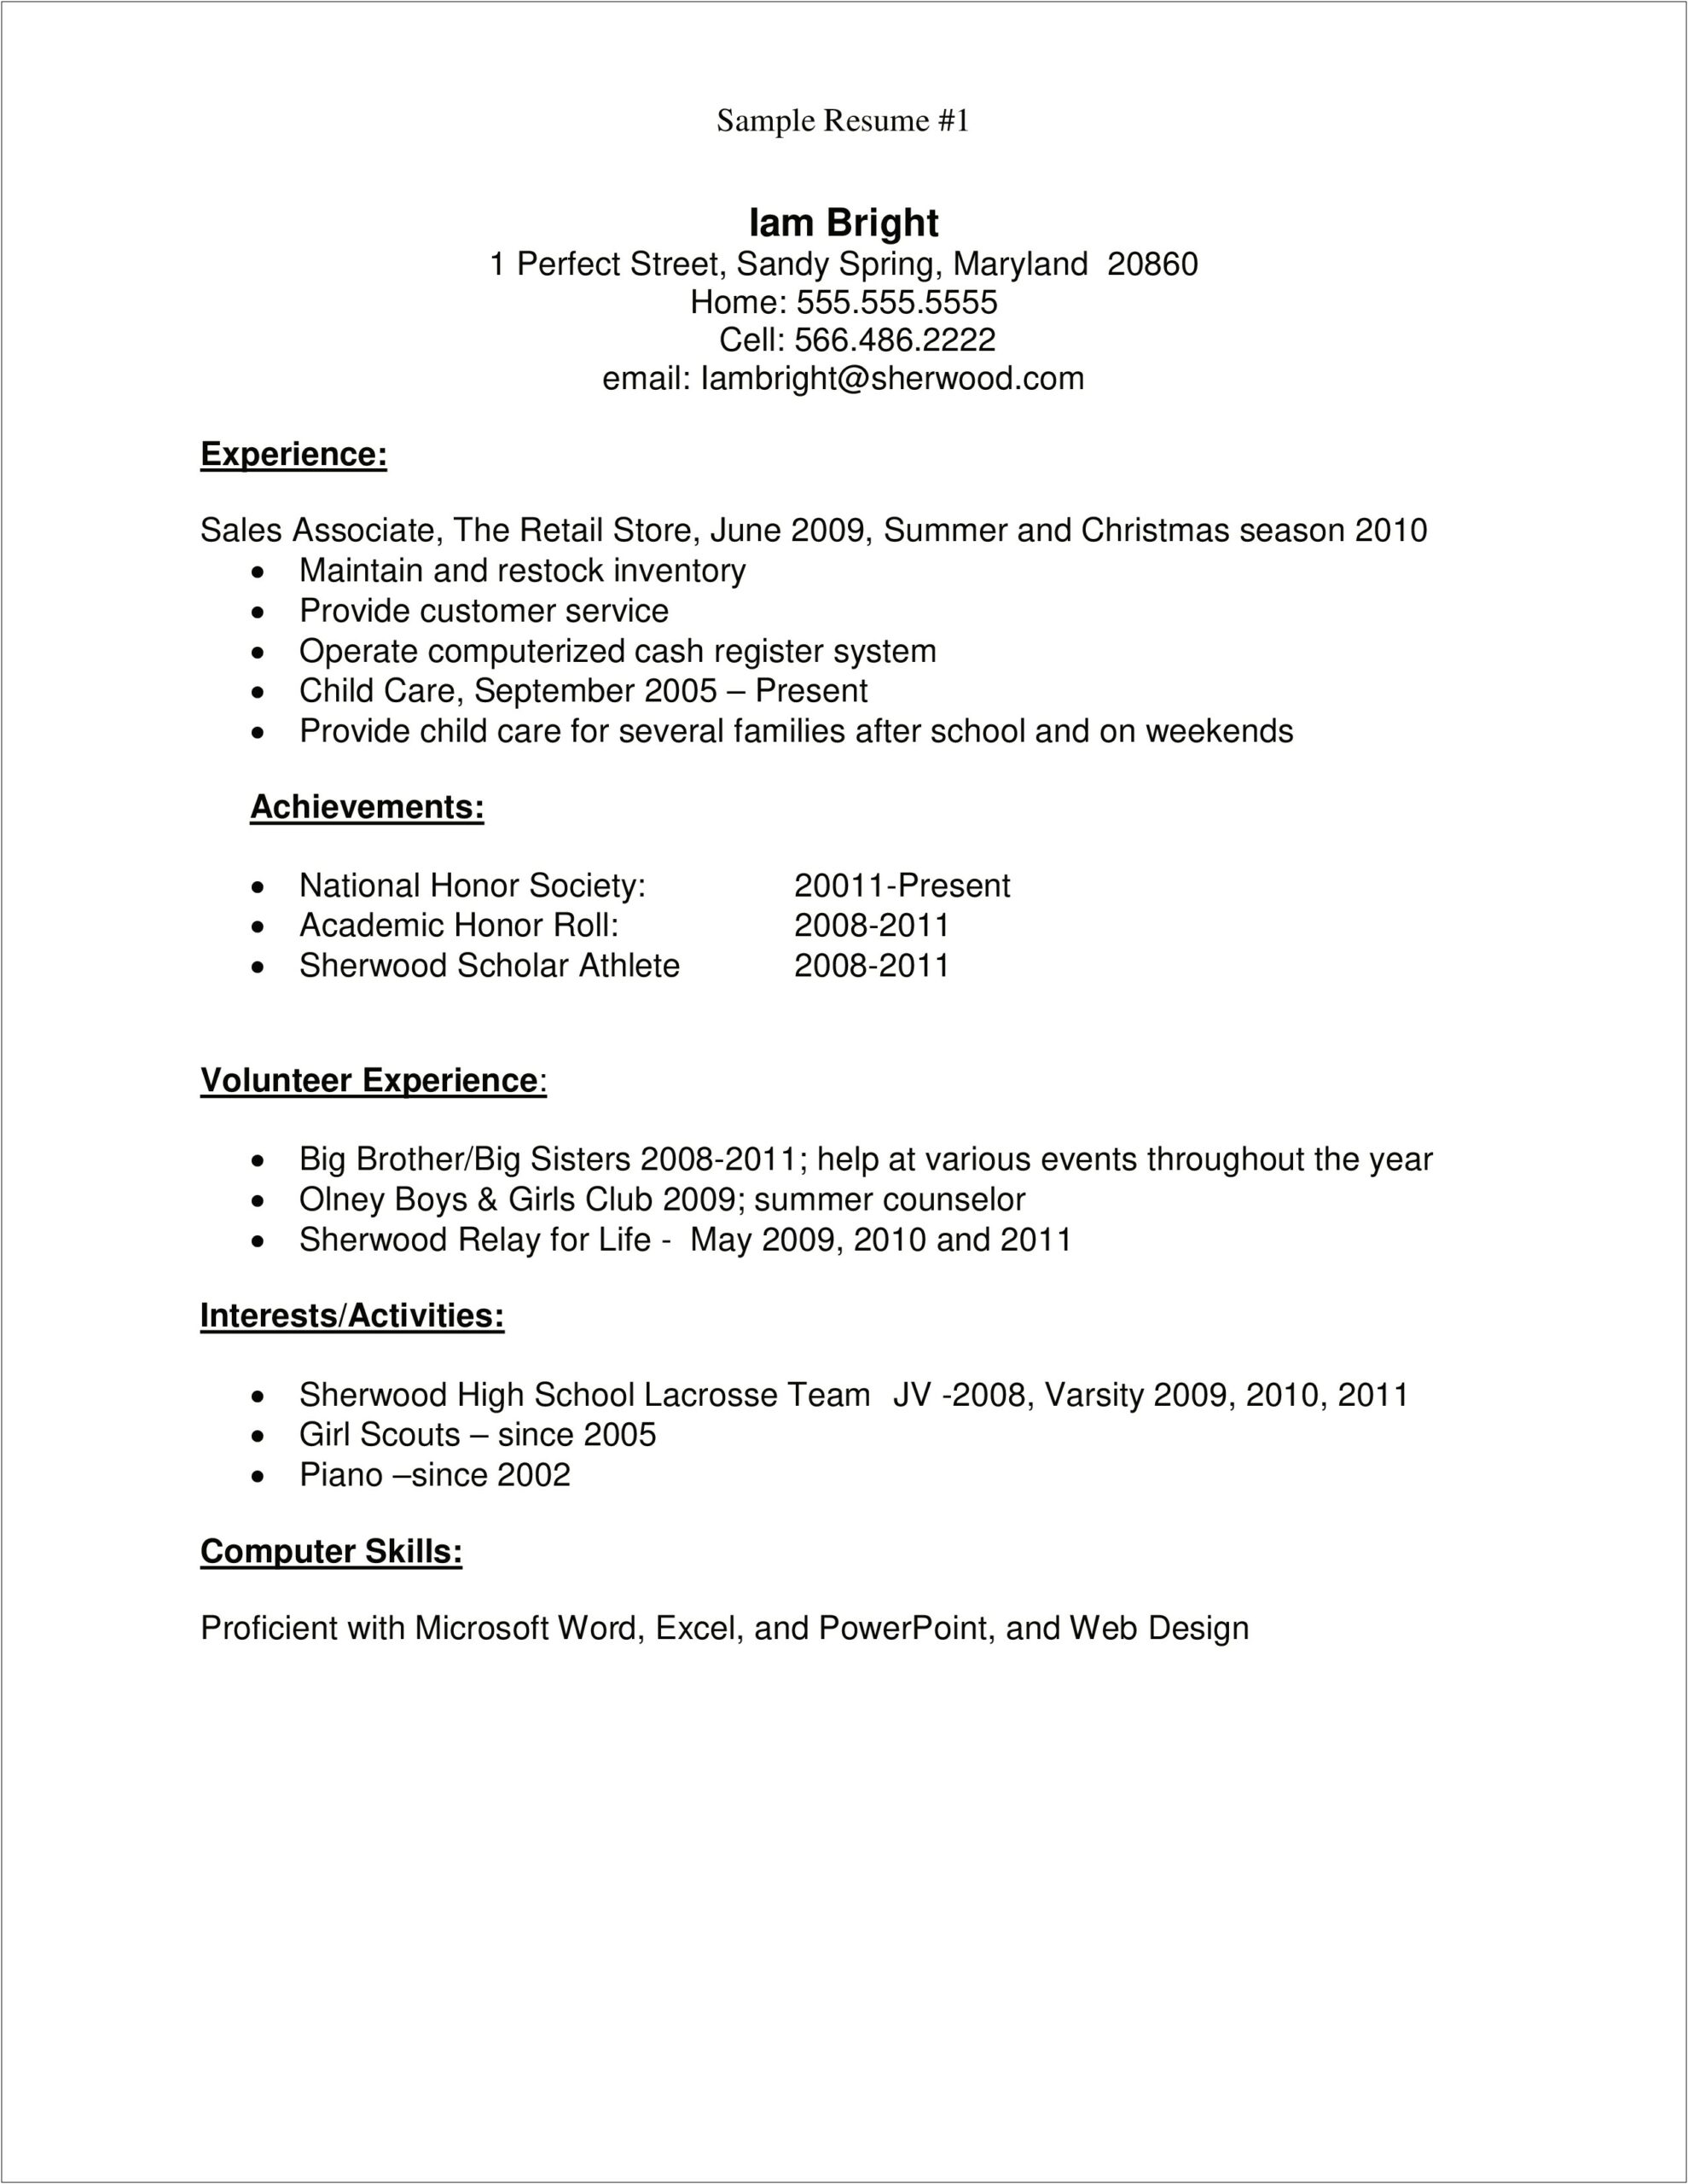 Making A Resume First Job